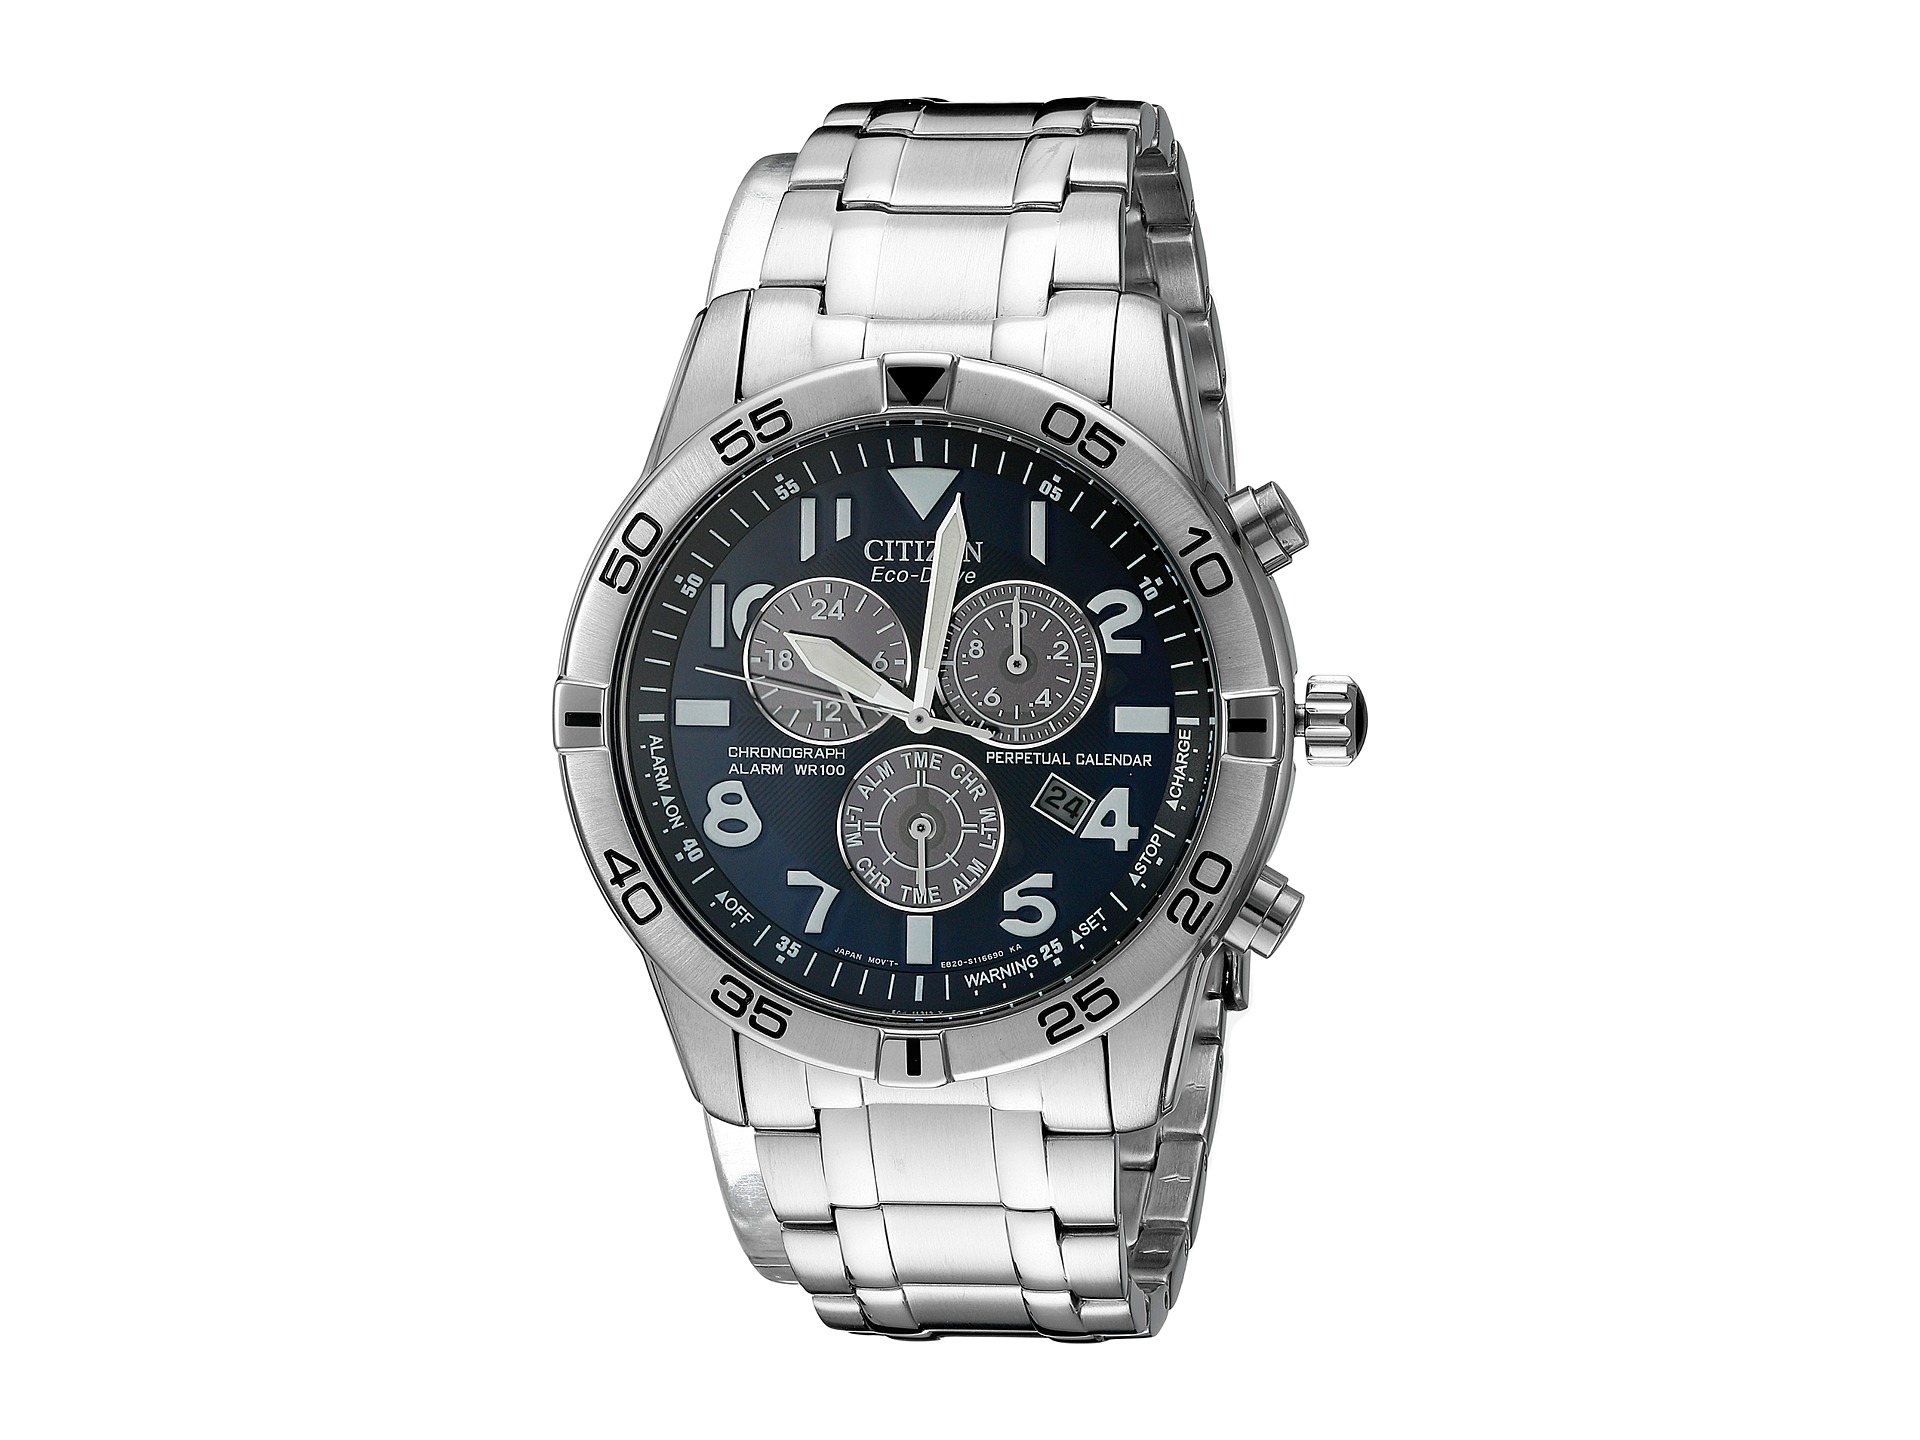 Citizen Watches BL5470 57L Eco Drive Stainless Steel Perpetual Calendar Chronograph Watch Silver Tone Stainless Steel